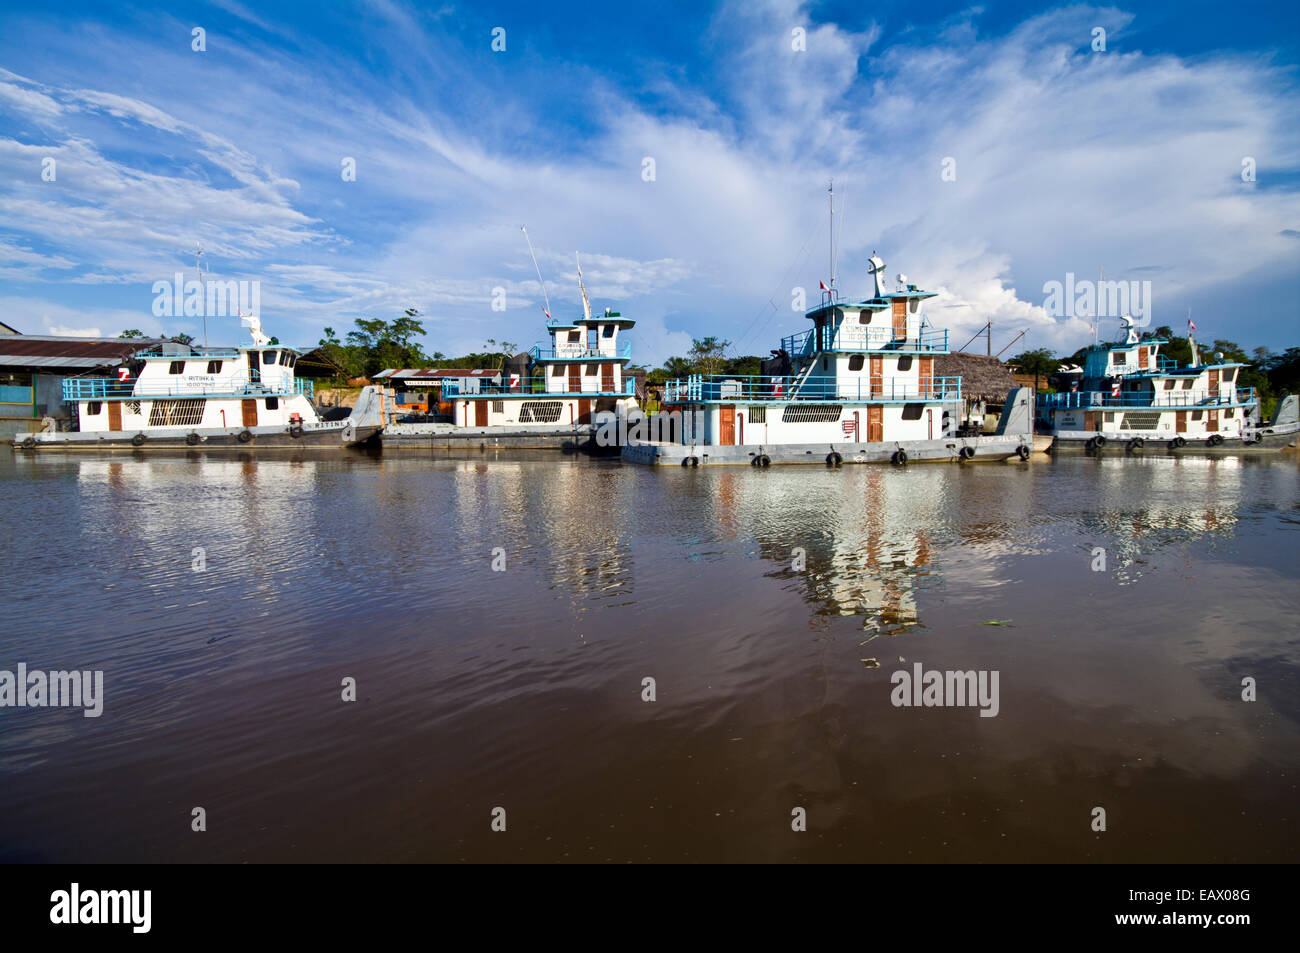 Logging barges and houseboats moored by the shore of the Amazon River and Nanay confluence. Stock Photo